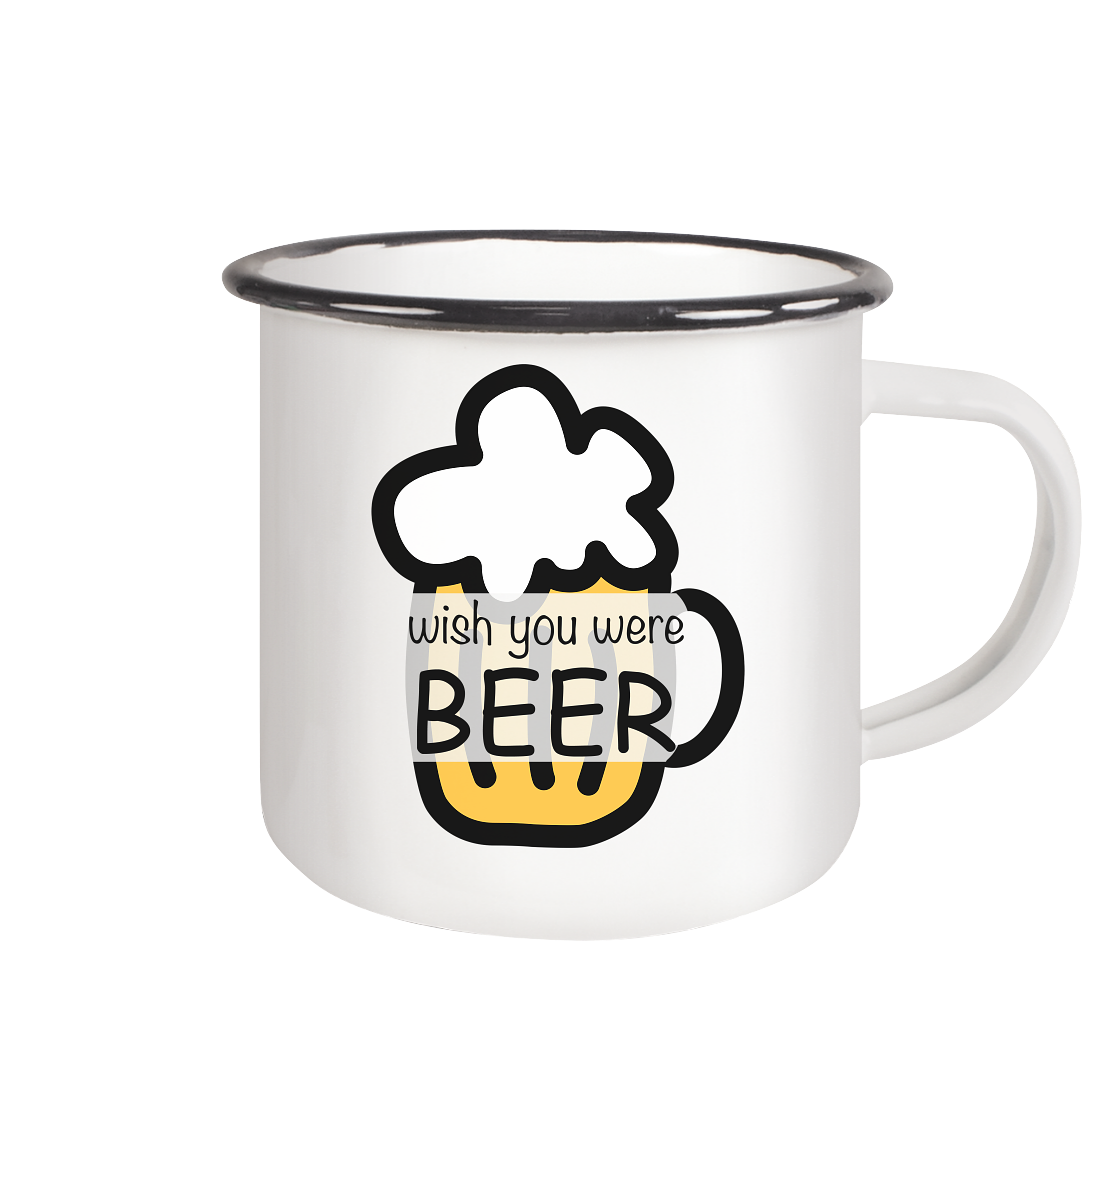 Tasse - wish you were beer - Emaille